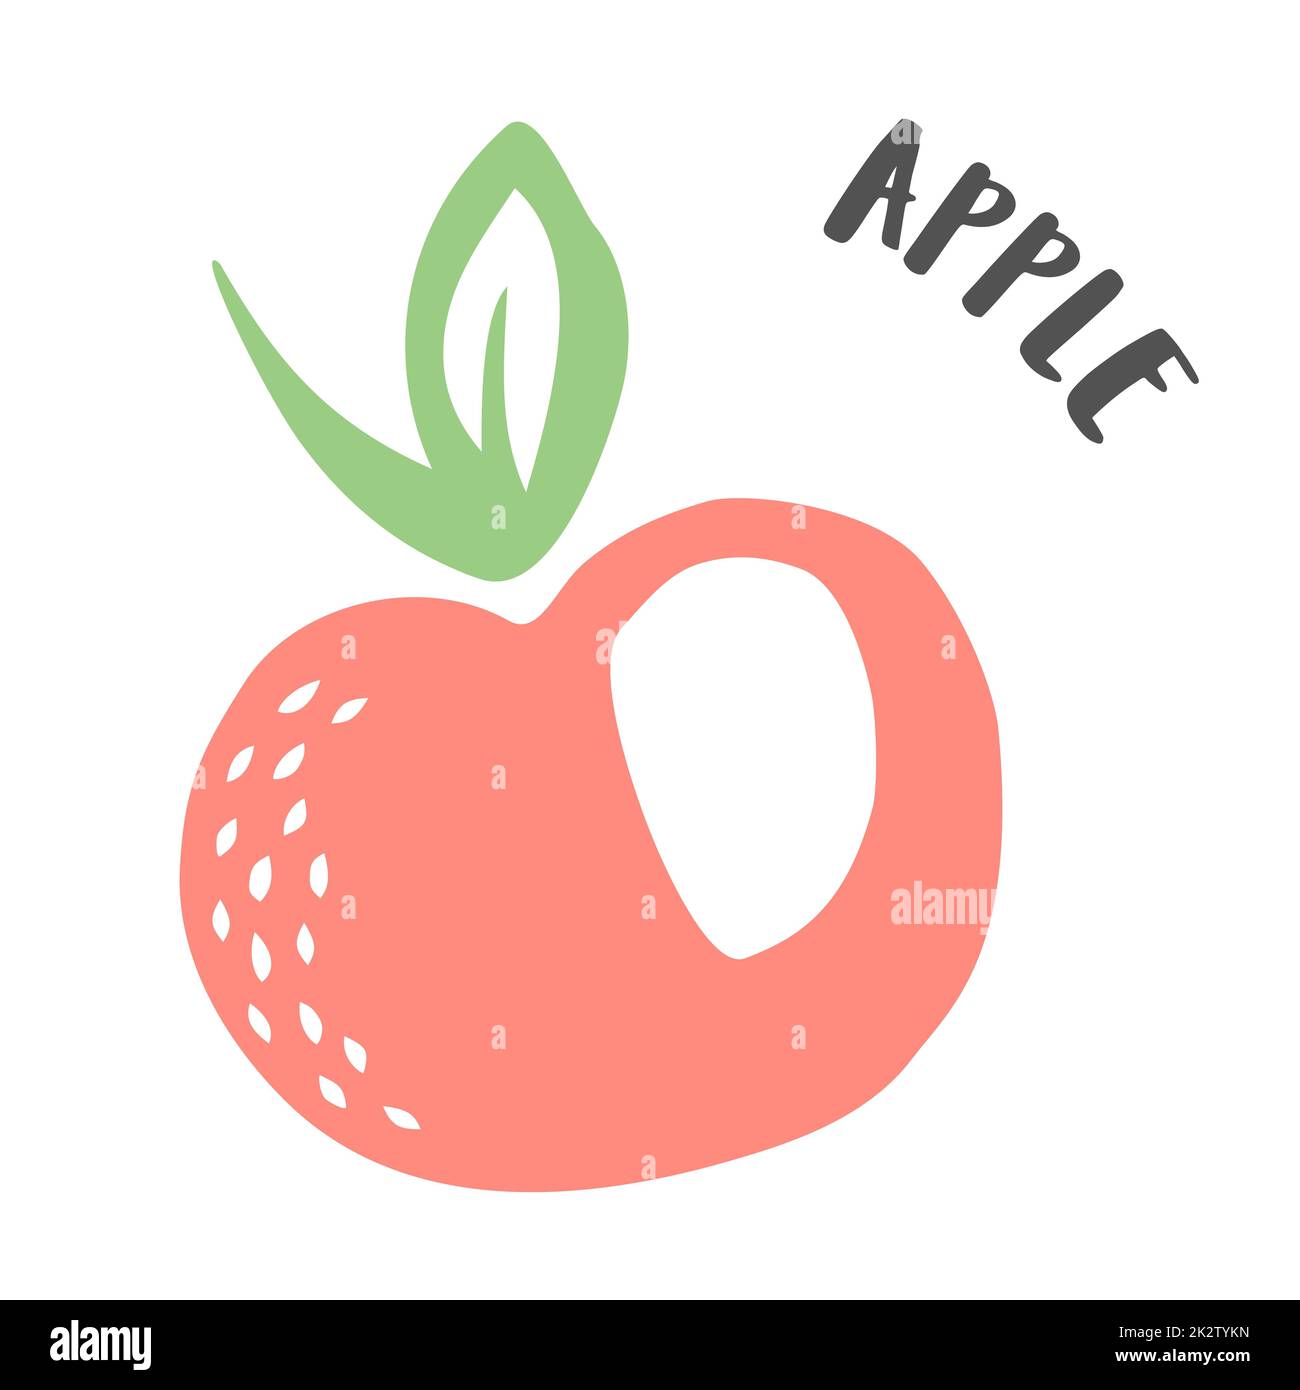 Apple drawing hand painted with ink brush isolated on white background. Vector illustration Stock Photo